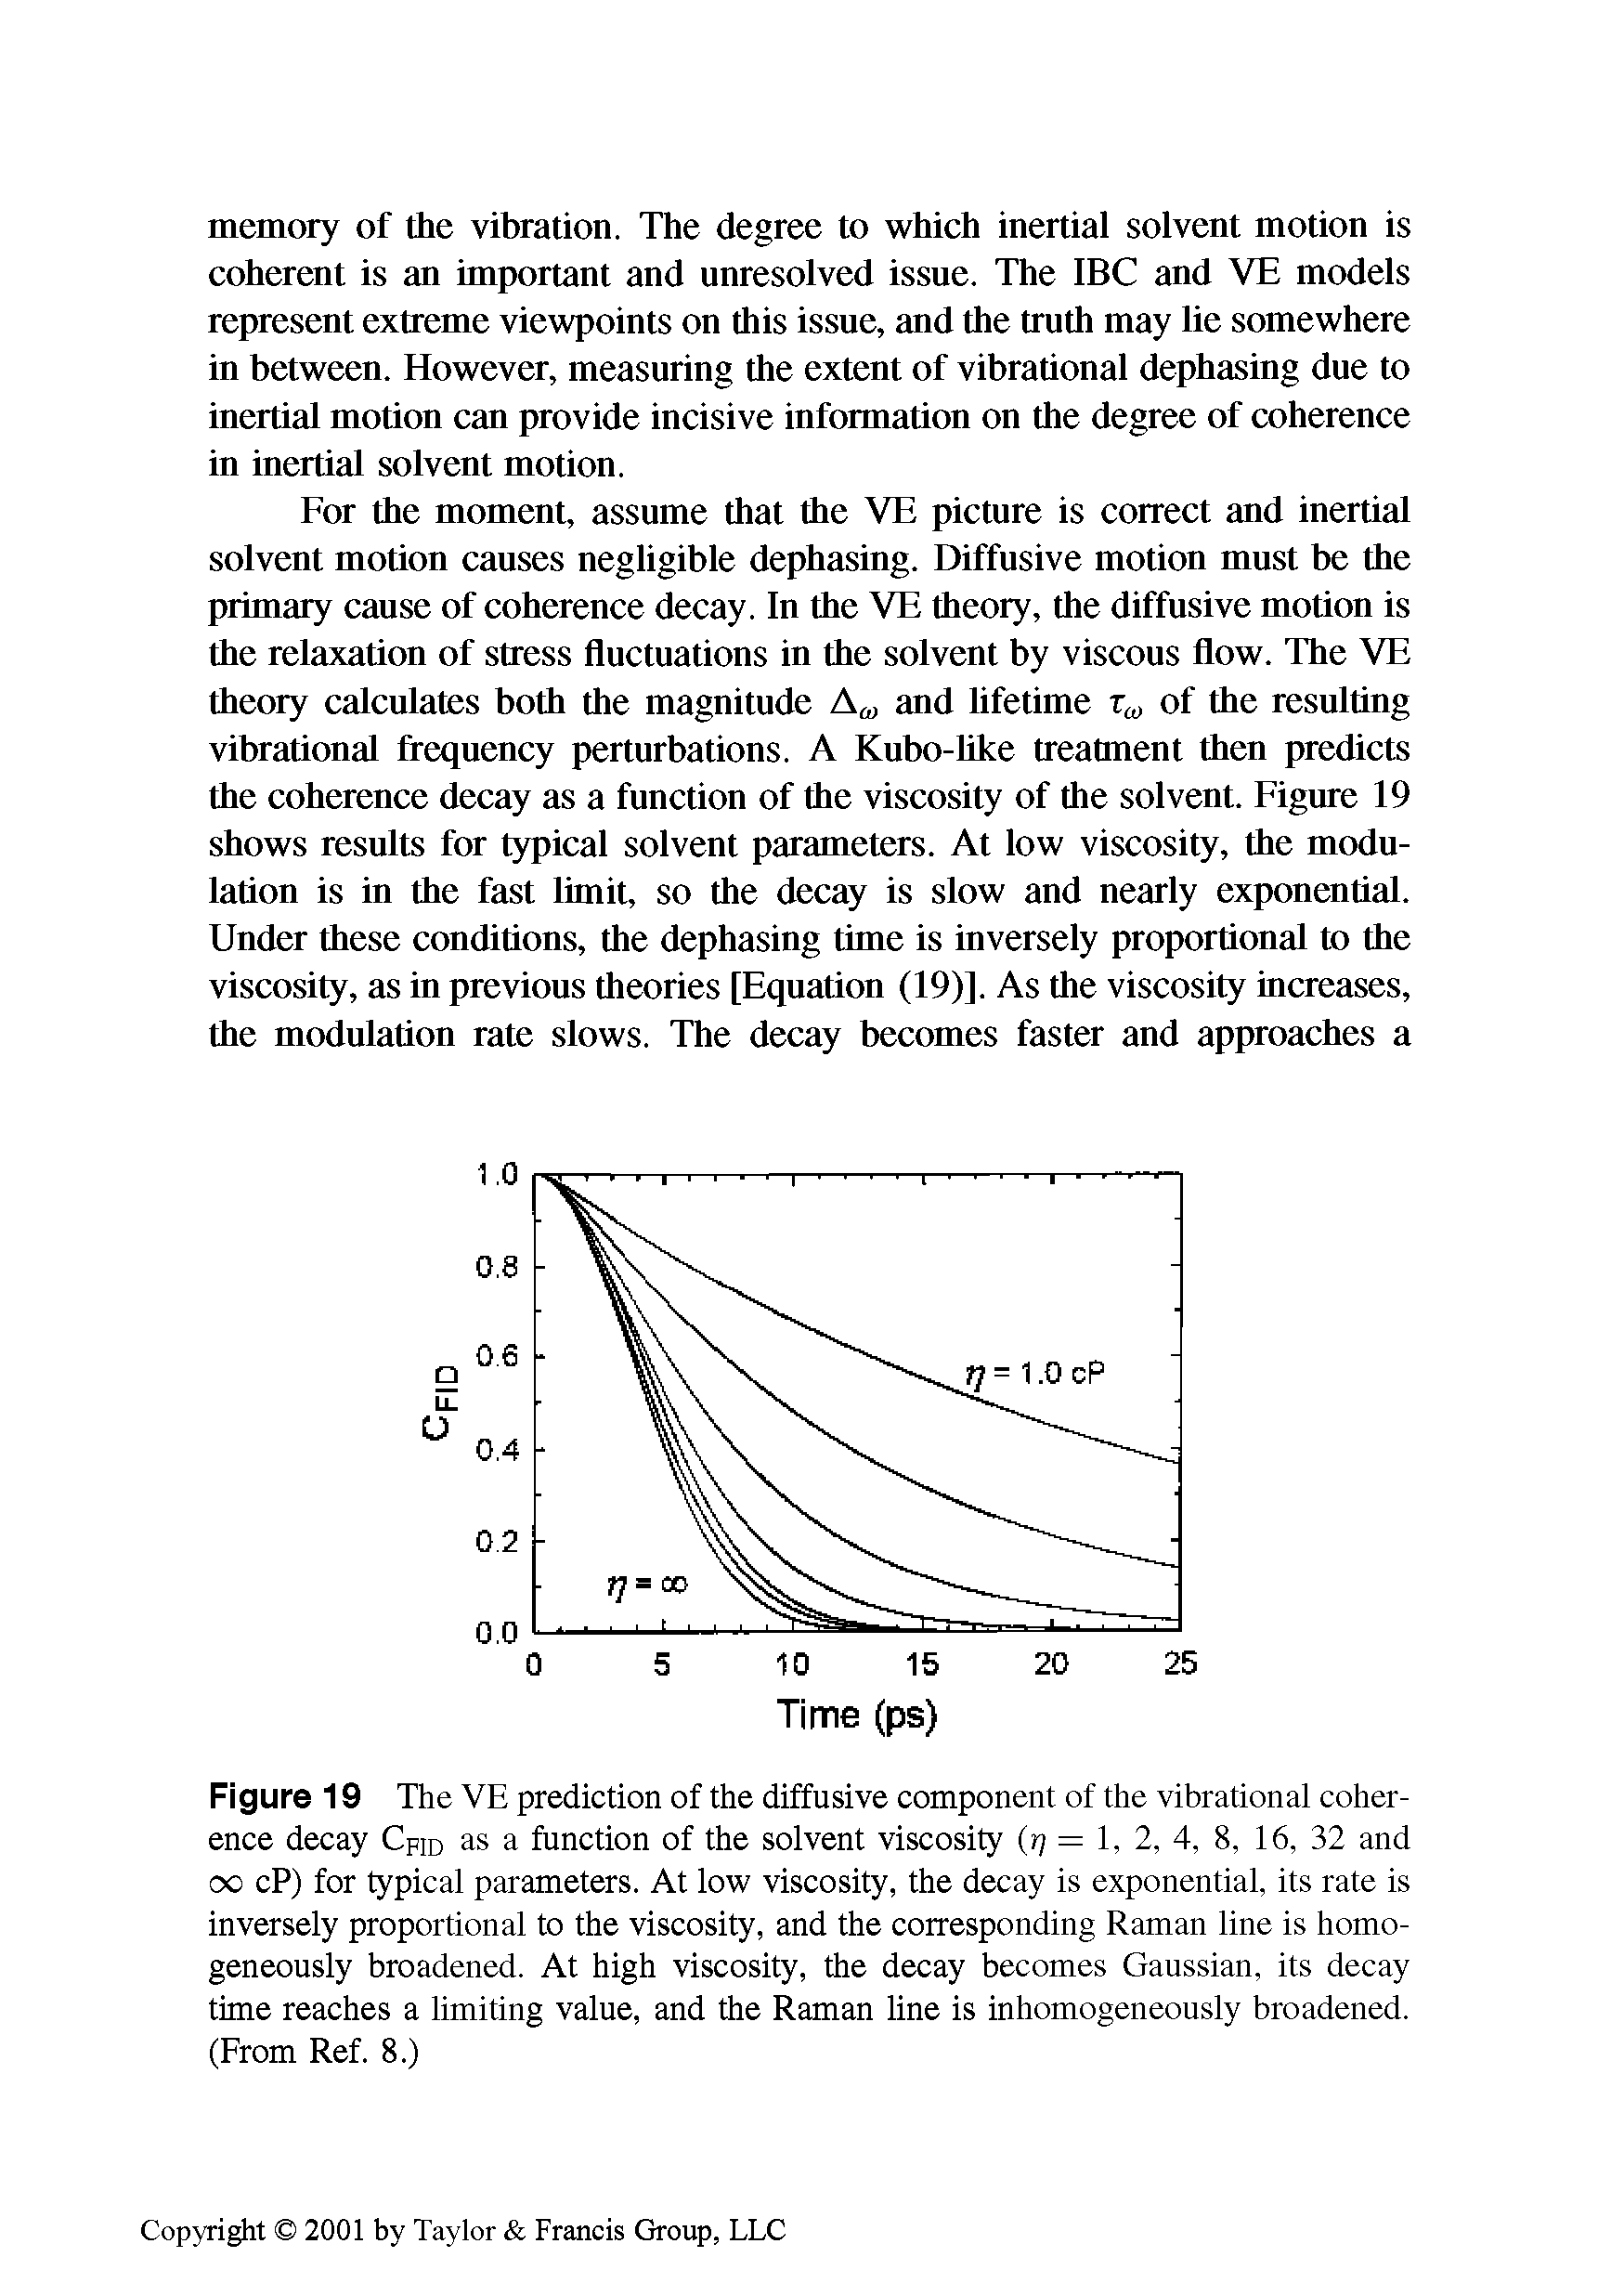 Figure 19 The VE prediction of the diffusive component of the vibrational coherence decay CpiD as a function of the solvent viscosity (ij = 1, 2, 4, 8, 16, 32 and oo cP) for typical parameters. At low viscosity, the decay is exponential, its rate is inversely proportional to the viscosity, and the corresponding Raman line is homogeneously broadened. At high viscosity, the decay becomes Gaussian, its decay time reaches a limiting value, and the Raman line is inhomogeneously broadened. (From Ref. 8.)...